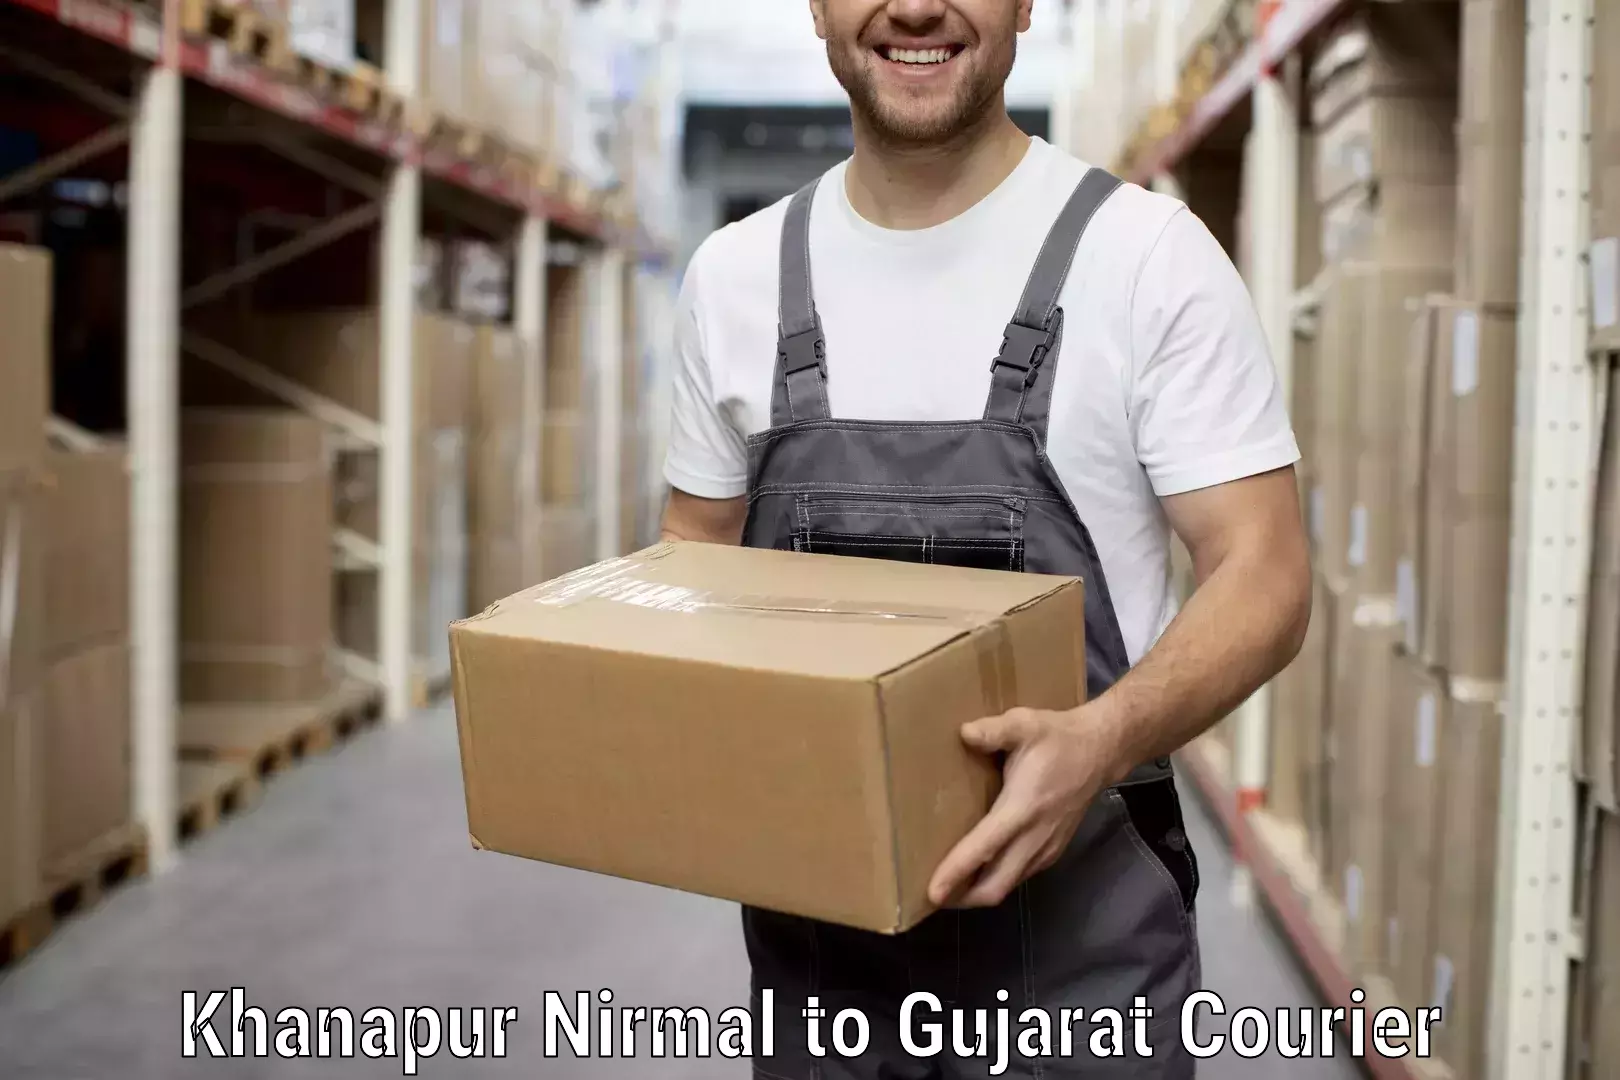 Trusted relocation experts Khanapur Nirmal to Gujarat